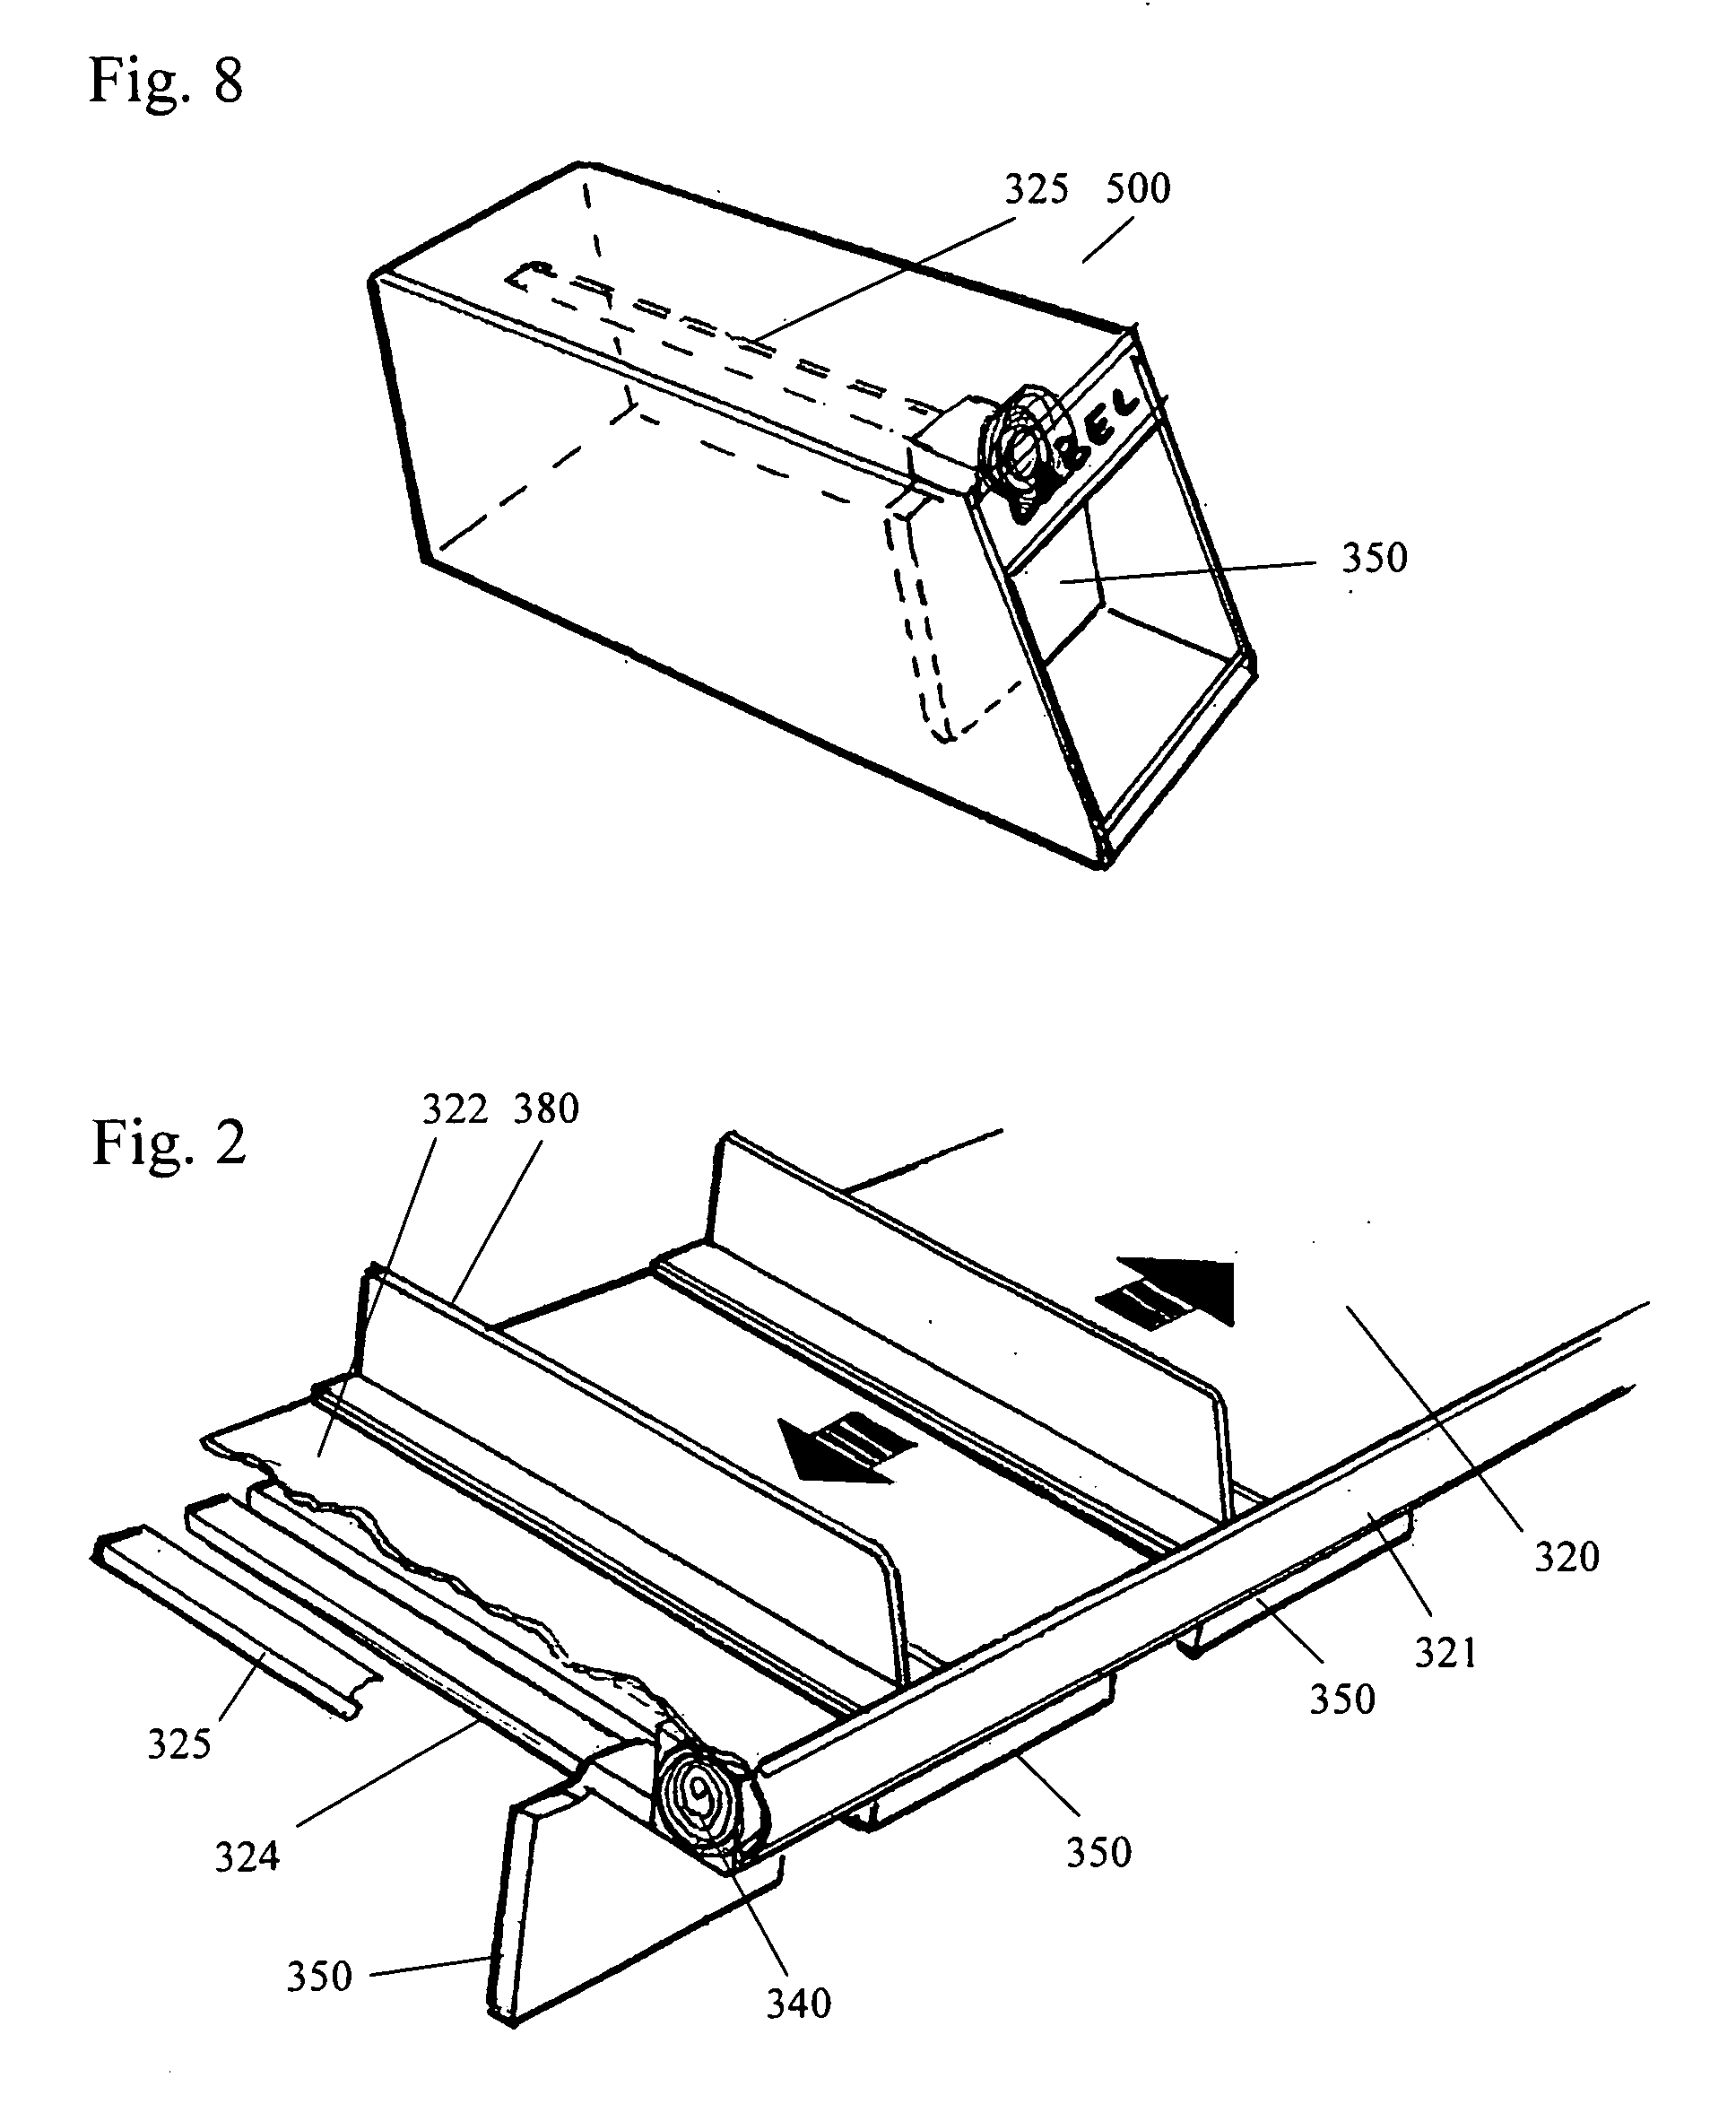 Product Dispenser Assembly